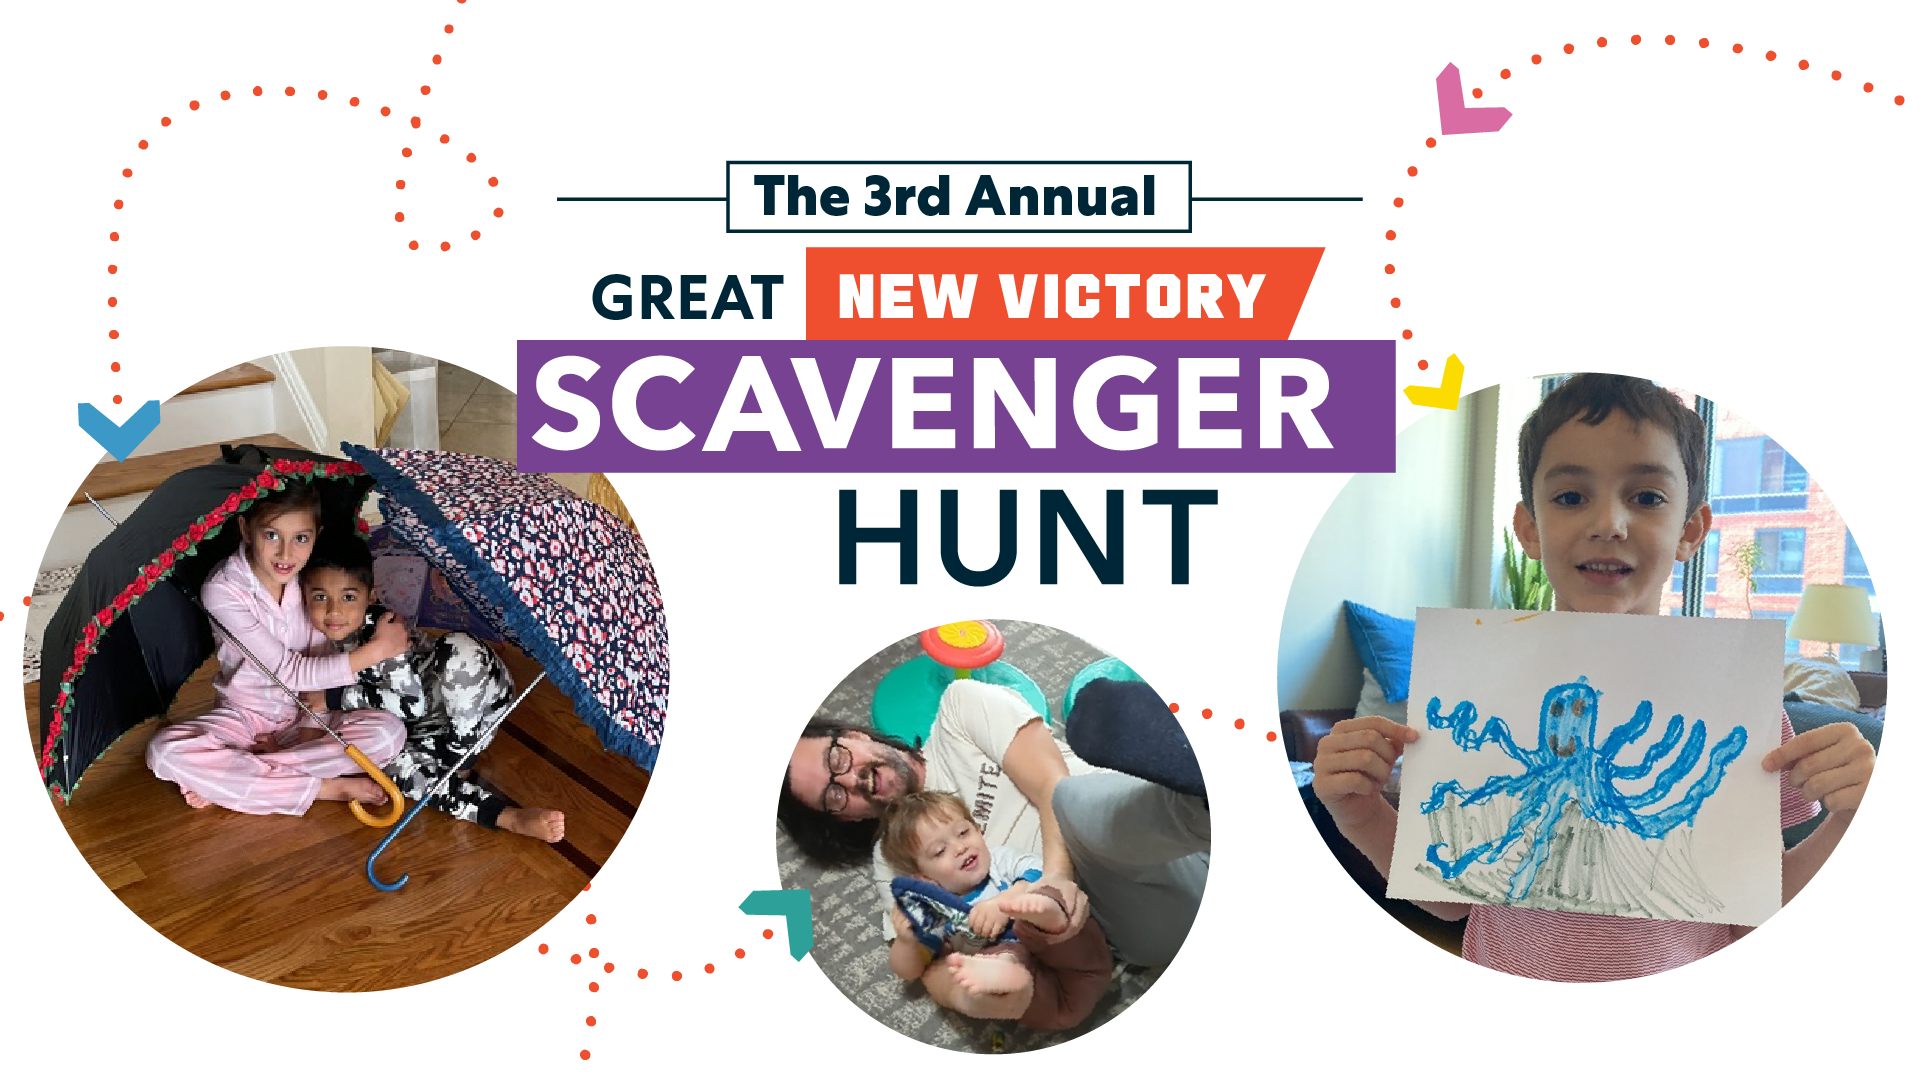 Collage of a family and two children completing missions in a scavenger hunt.